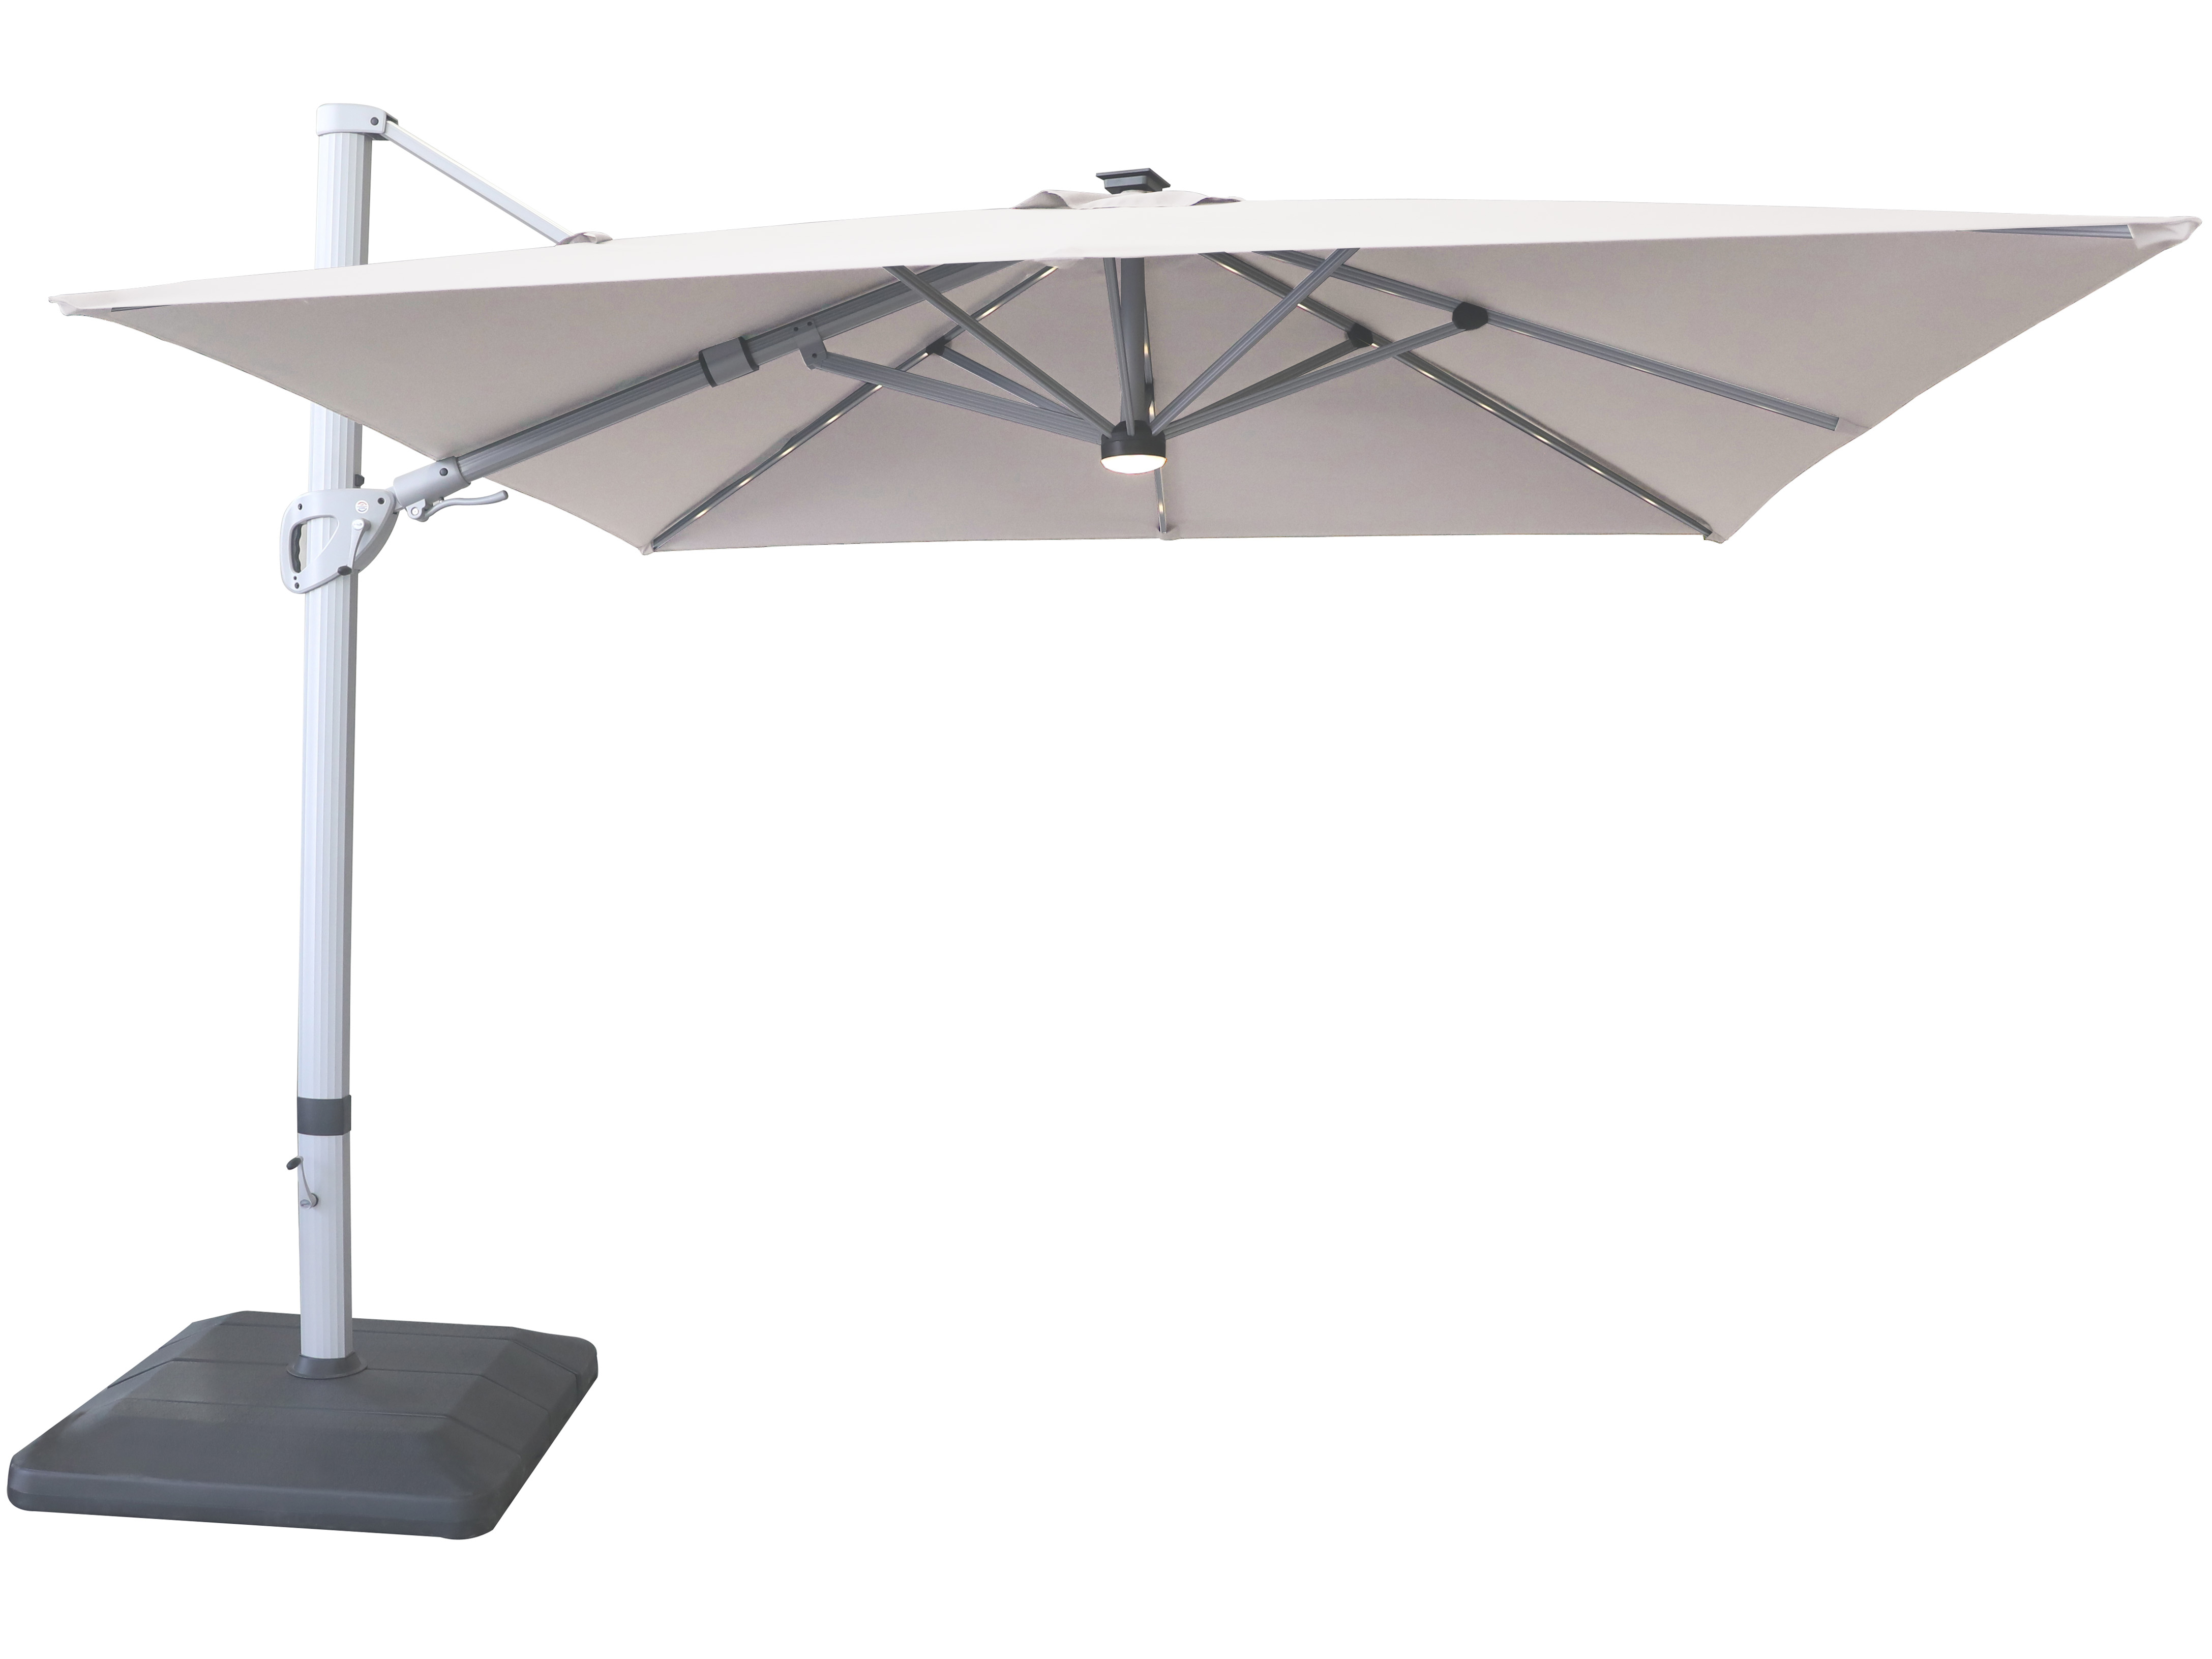 3m Square Caribbean Square Cantilever Parasol with Lights and Base